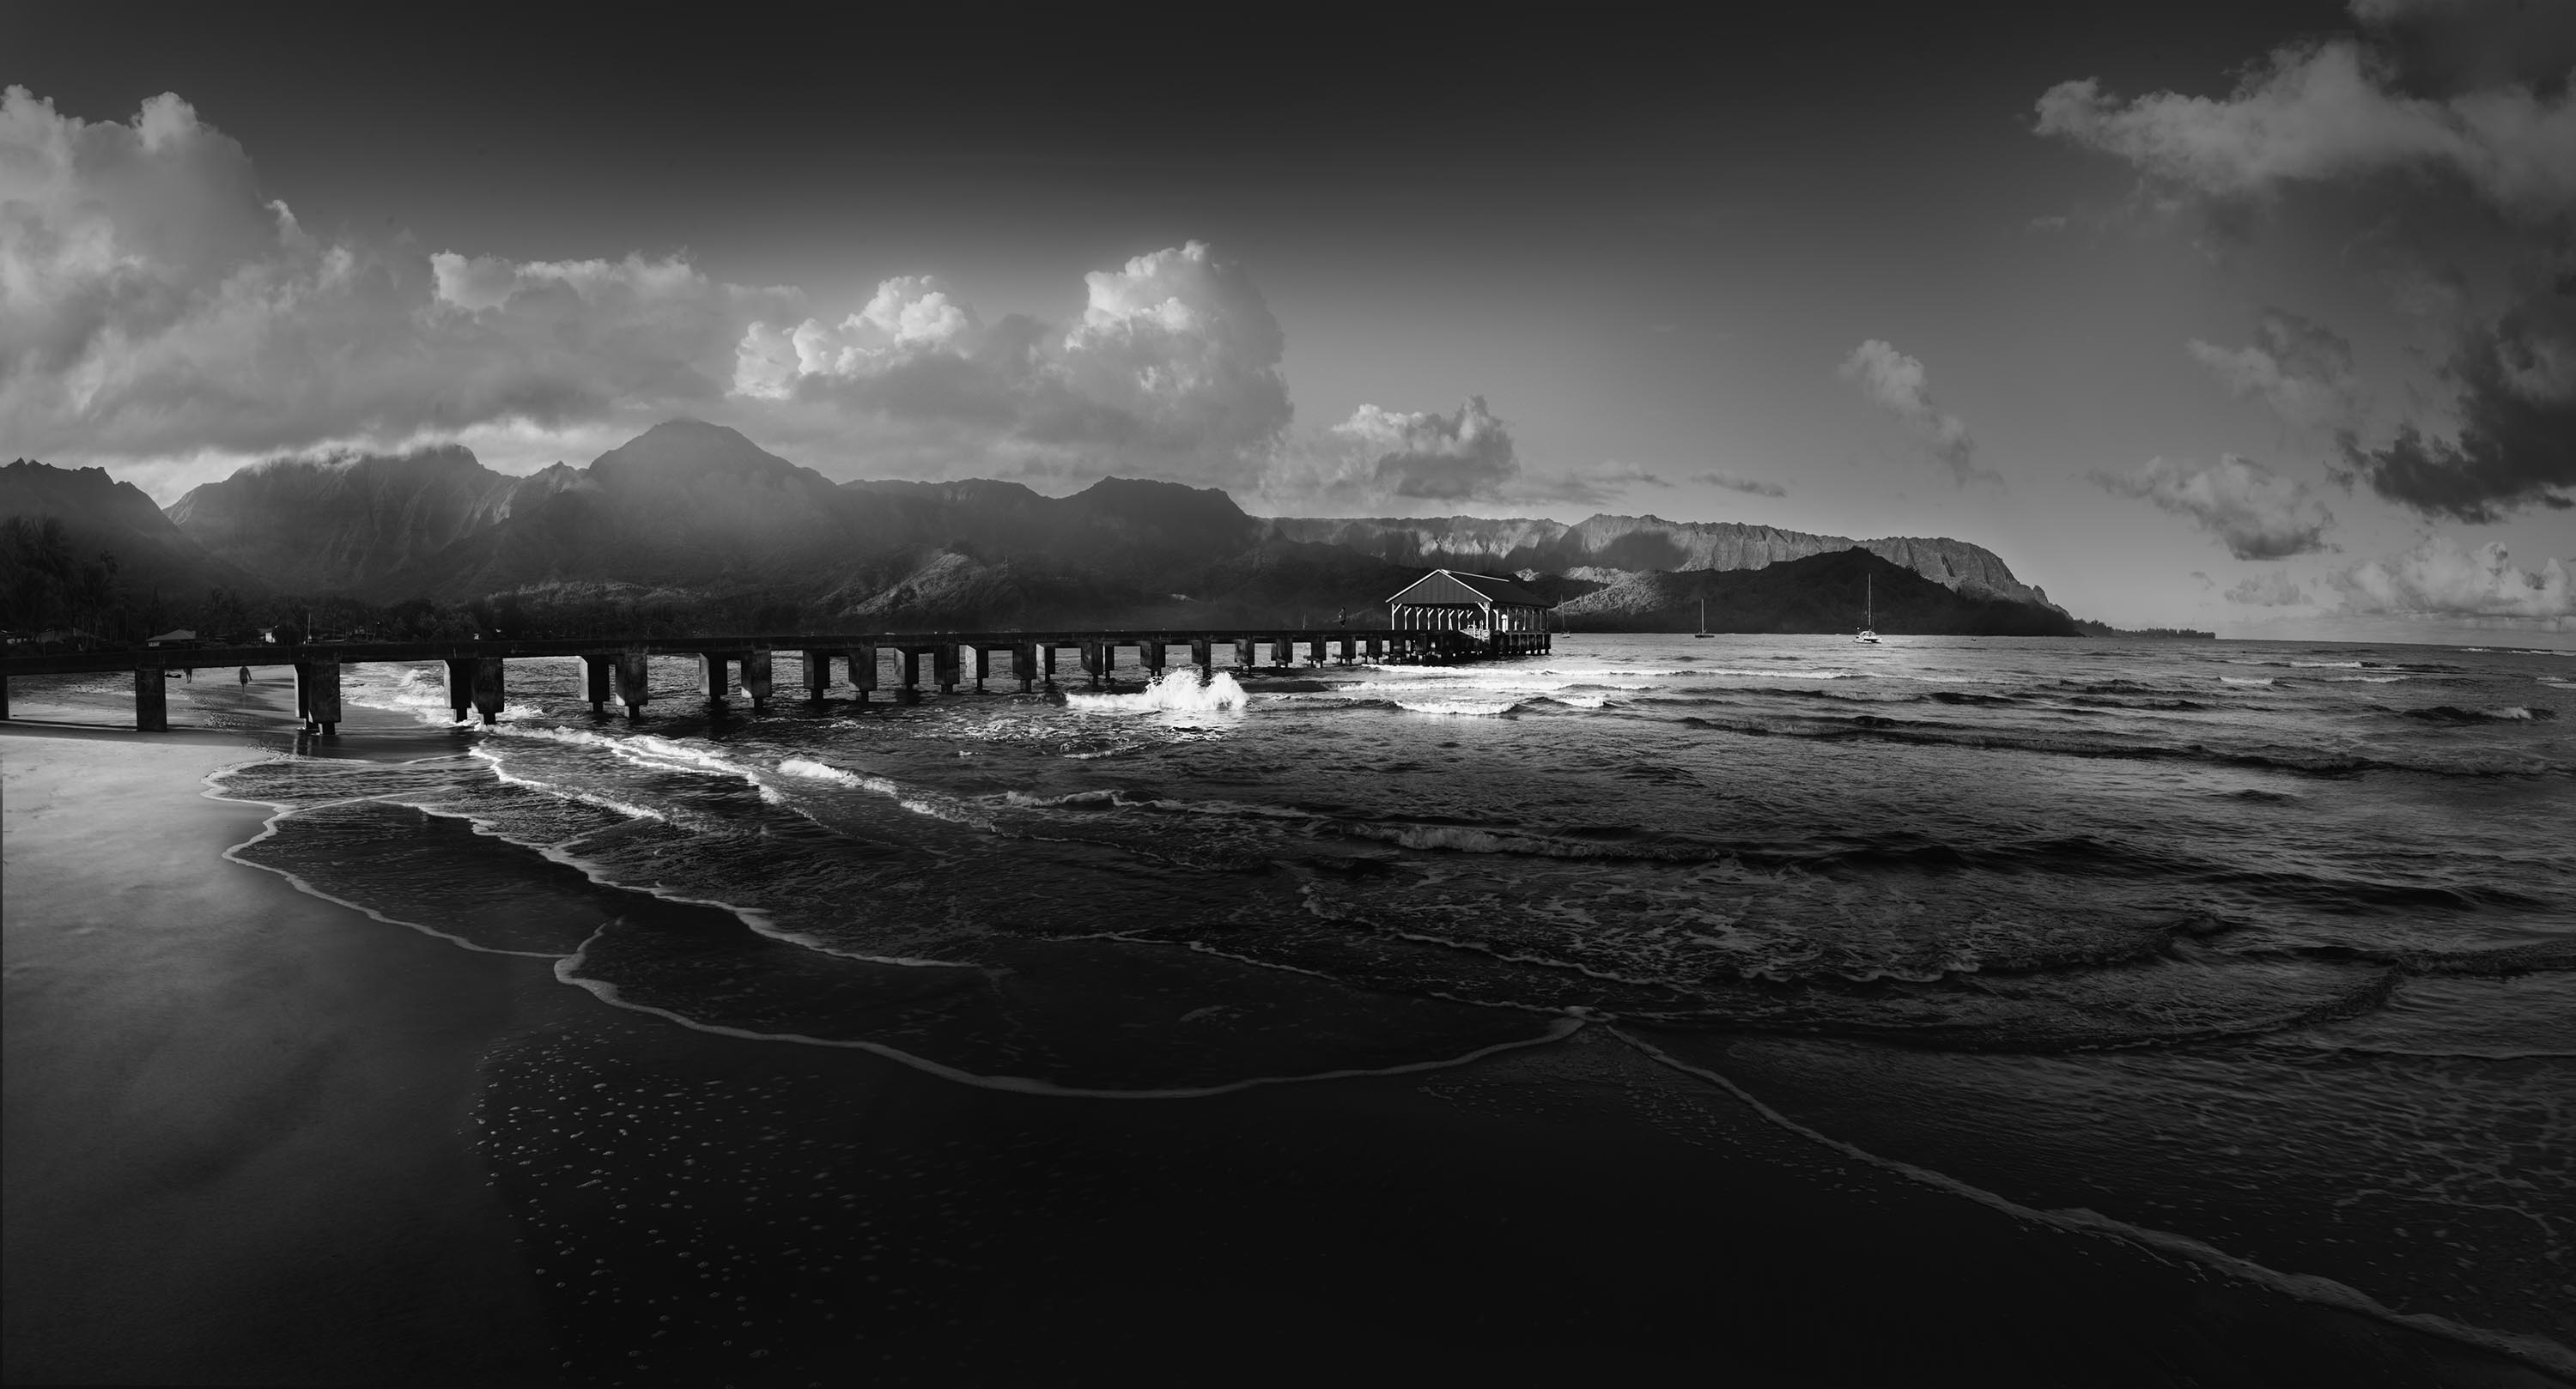 Hanalei Bay Pier in Black and White